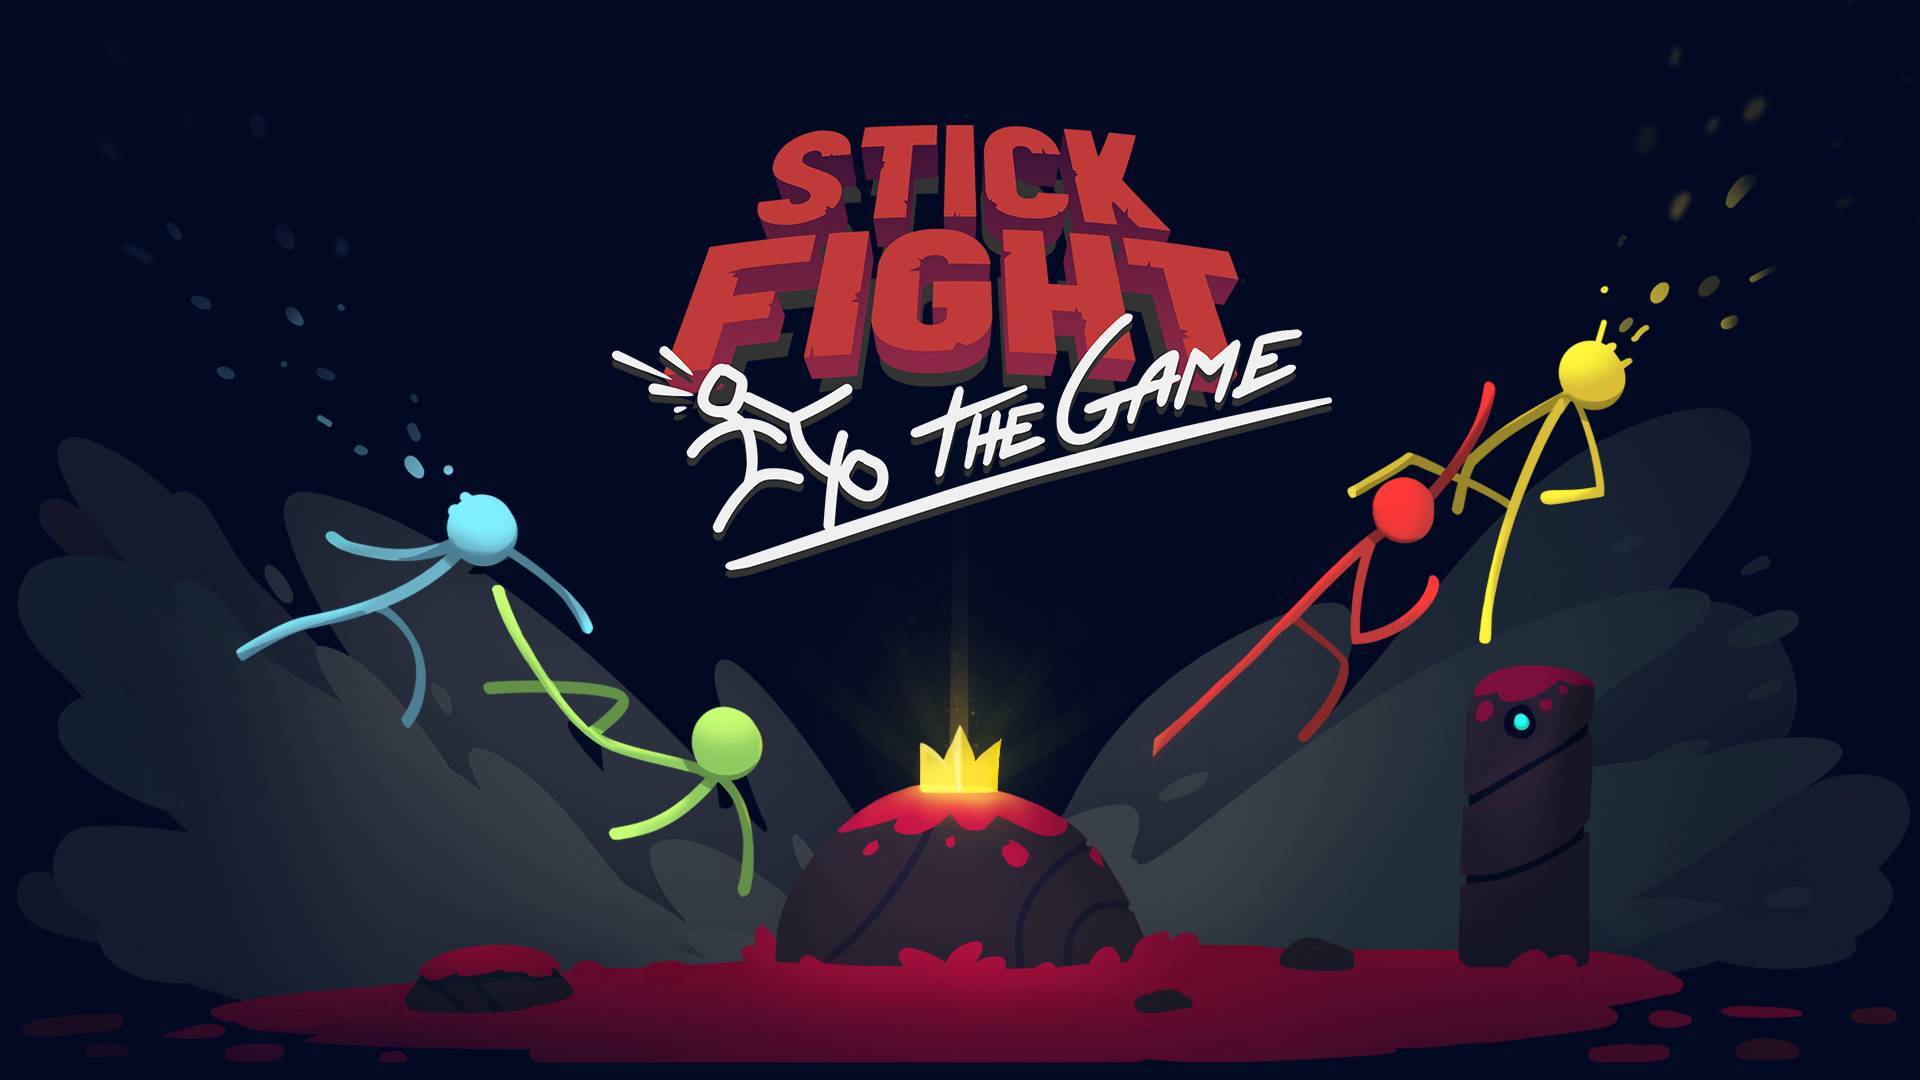 Stick fight steam is not фото 2